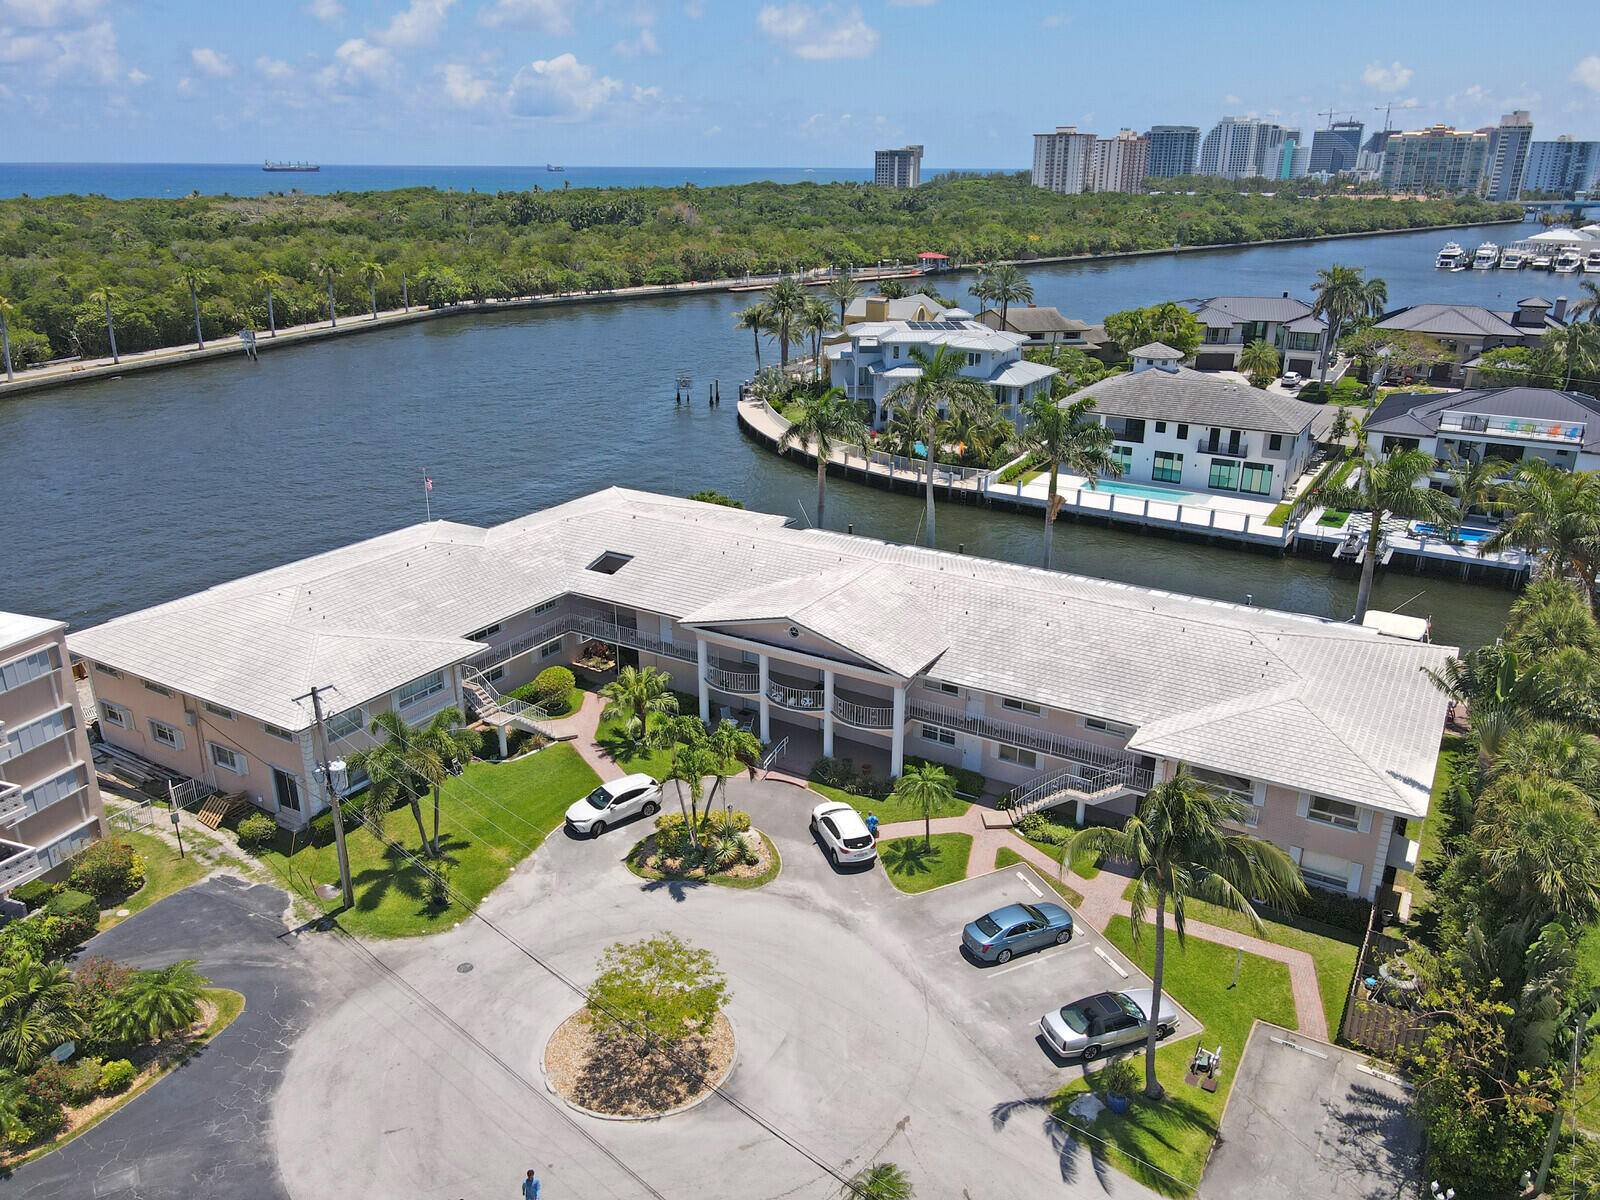 Immerse yourself in the luxury living with this prestigious offering a first floor corner unit overlooking the Intracoastal, in the highly sought after Coral Ridge enclave where opulence meets tranquility.